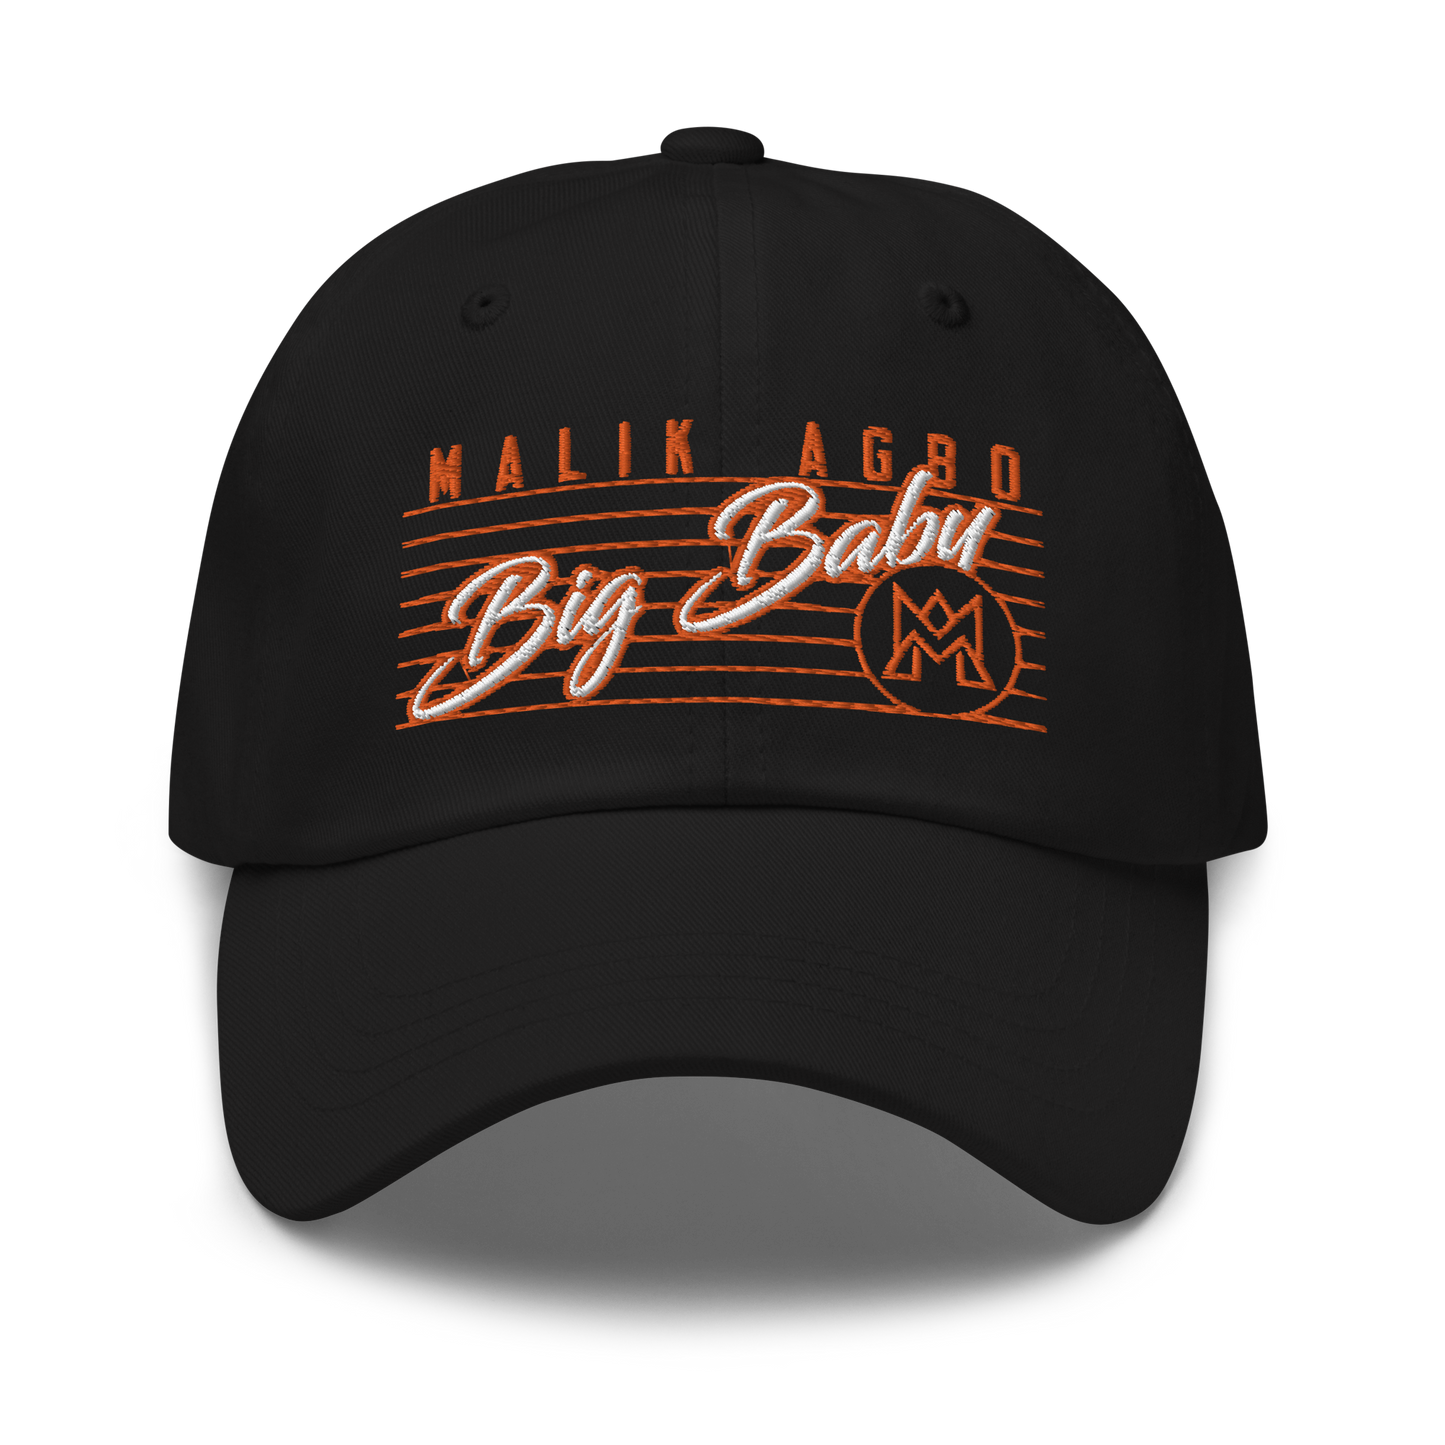 AGBO "BIG BABY" PERFORMANCE CAP